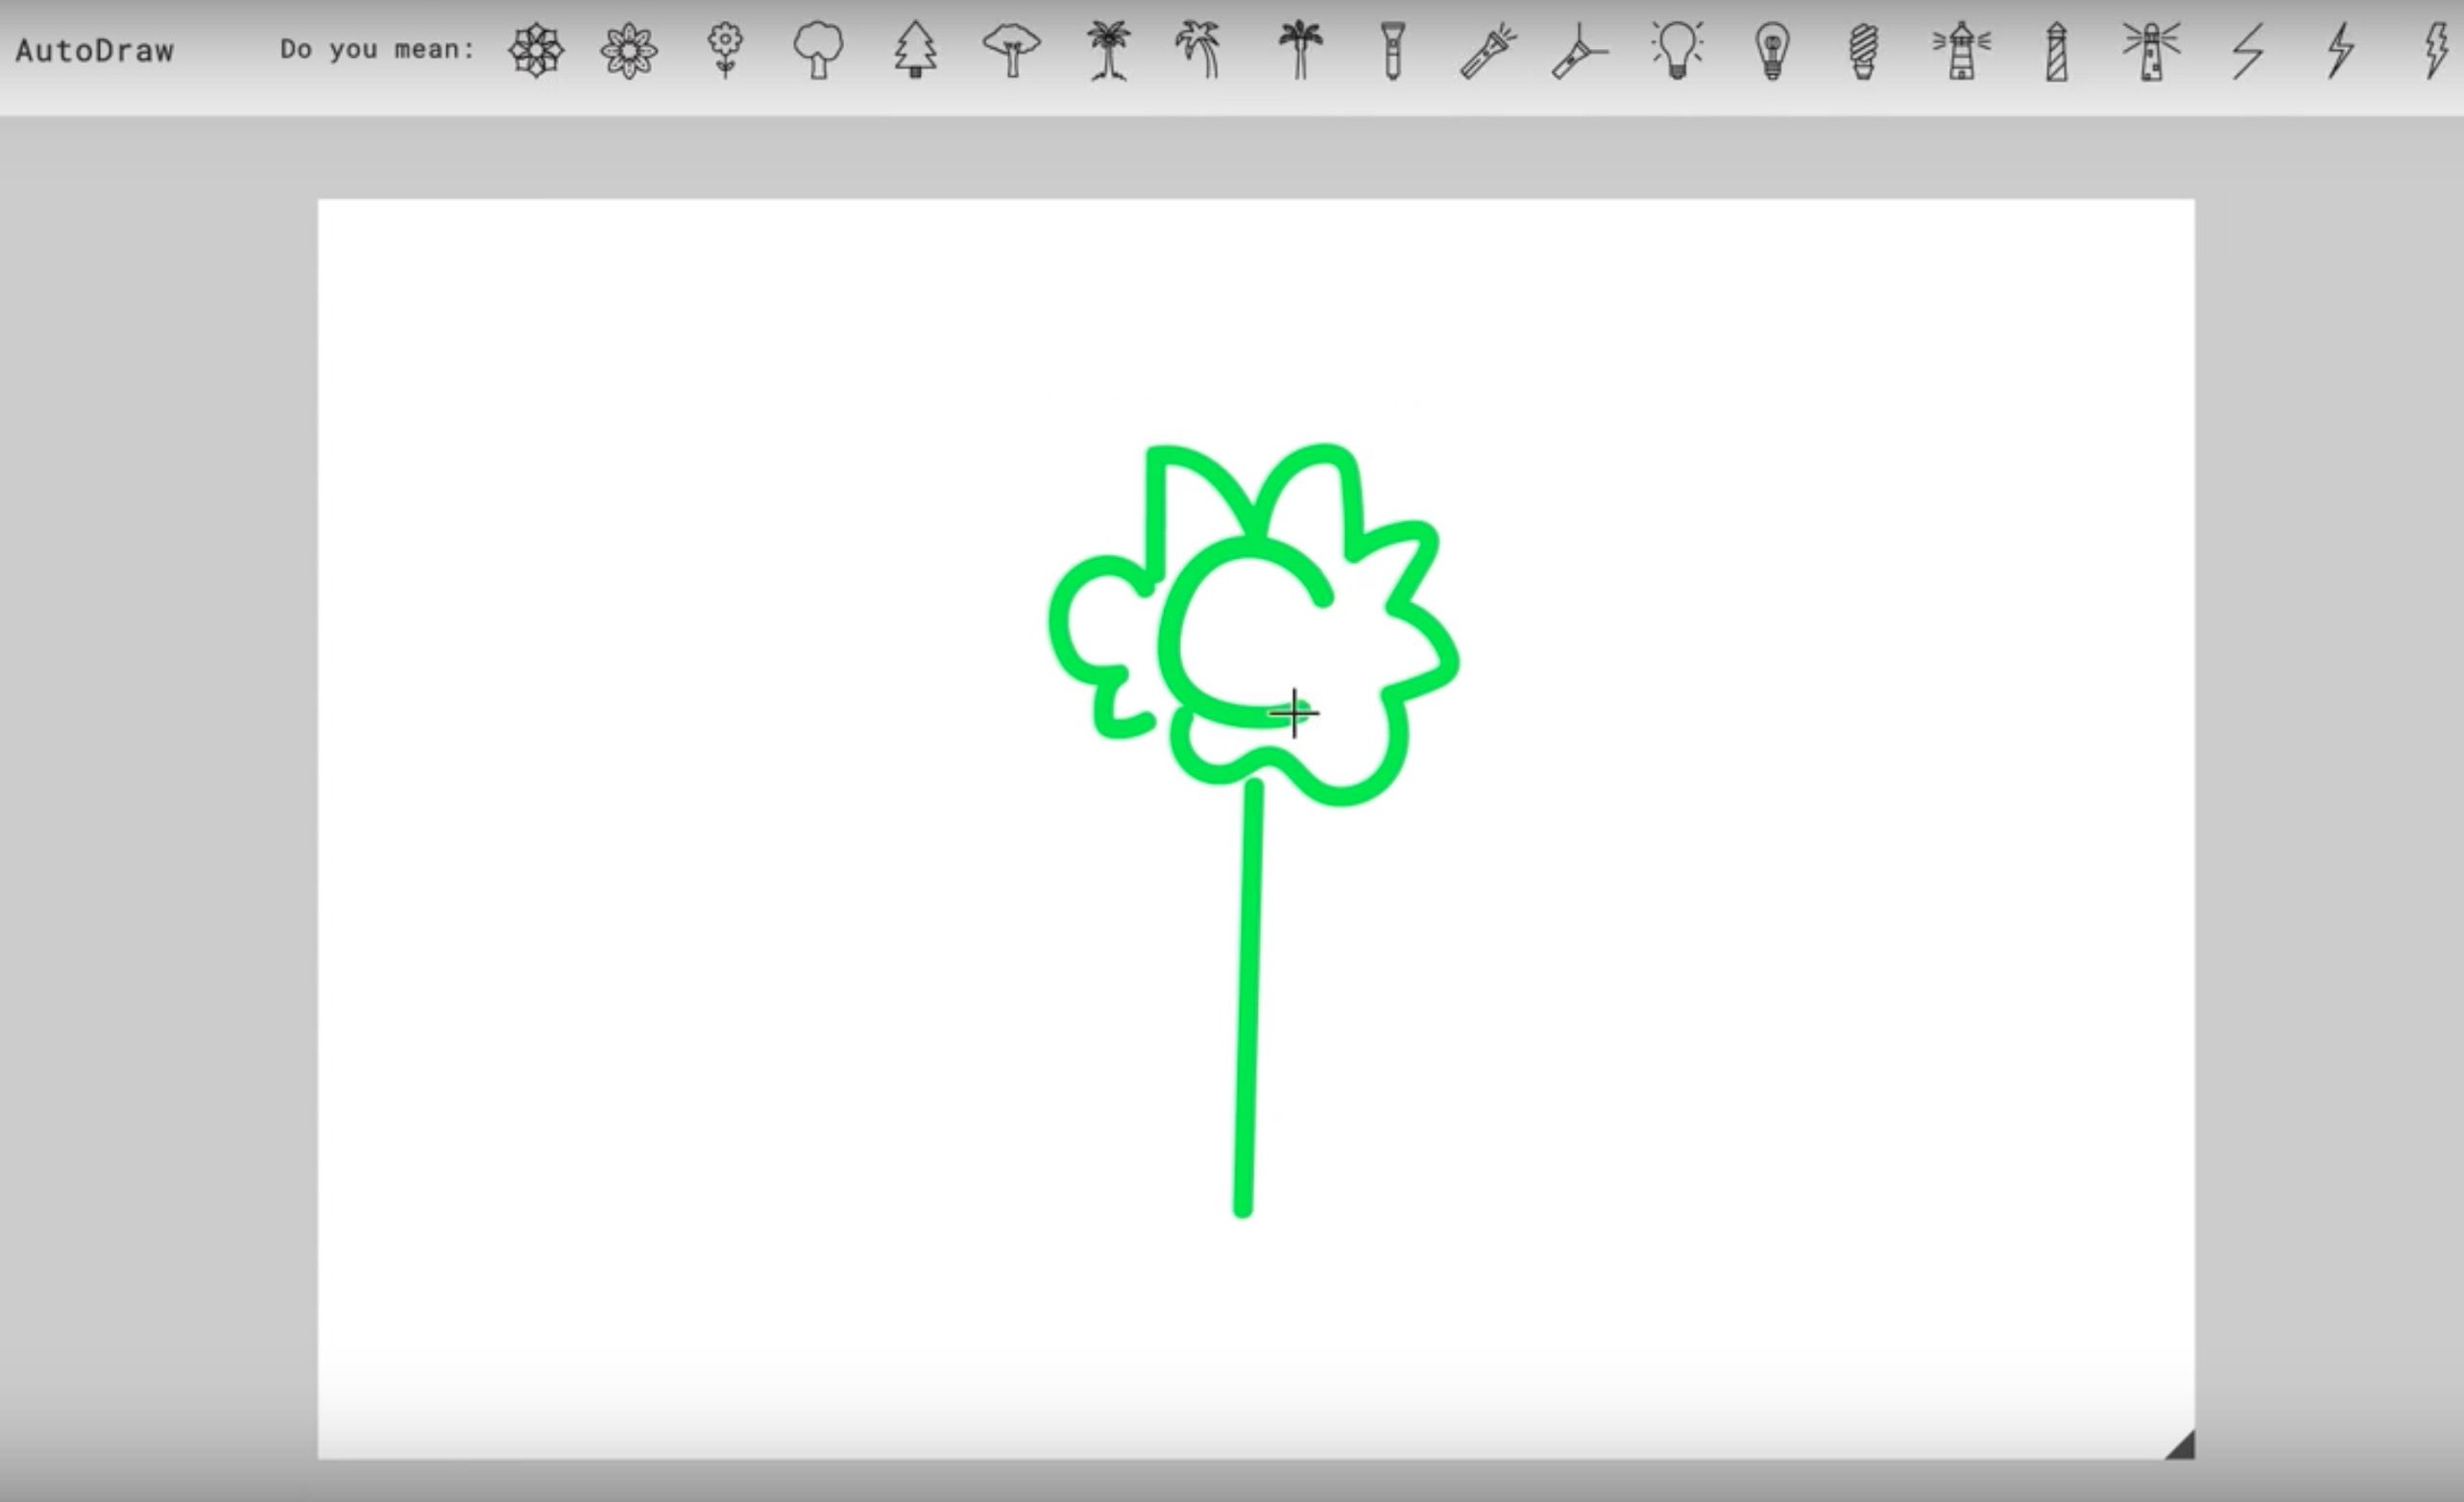 Google's AutoDraw uses machine learning to help you draw like a